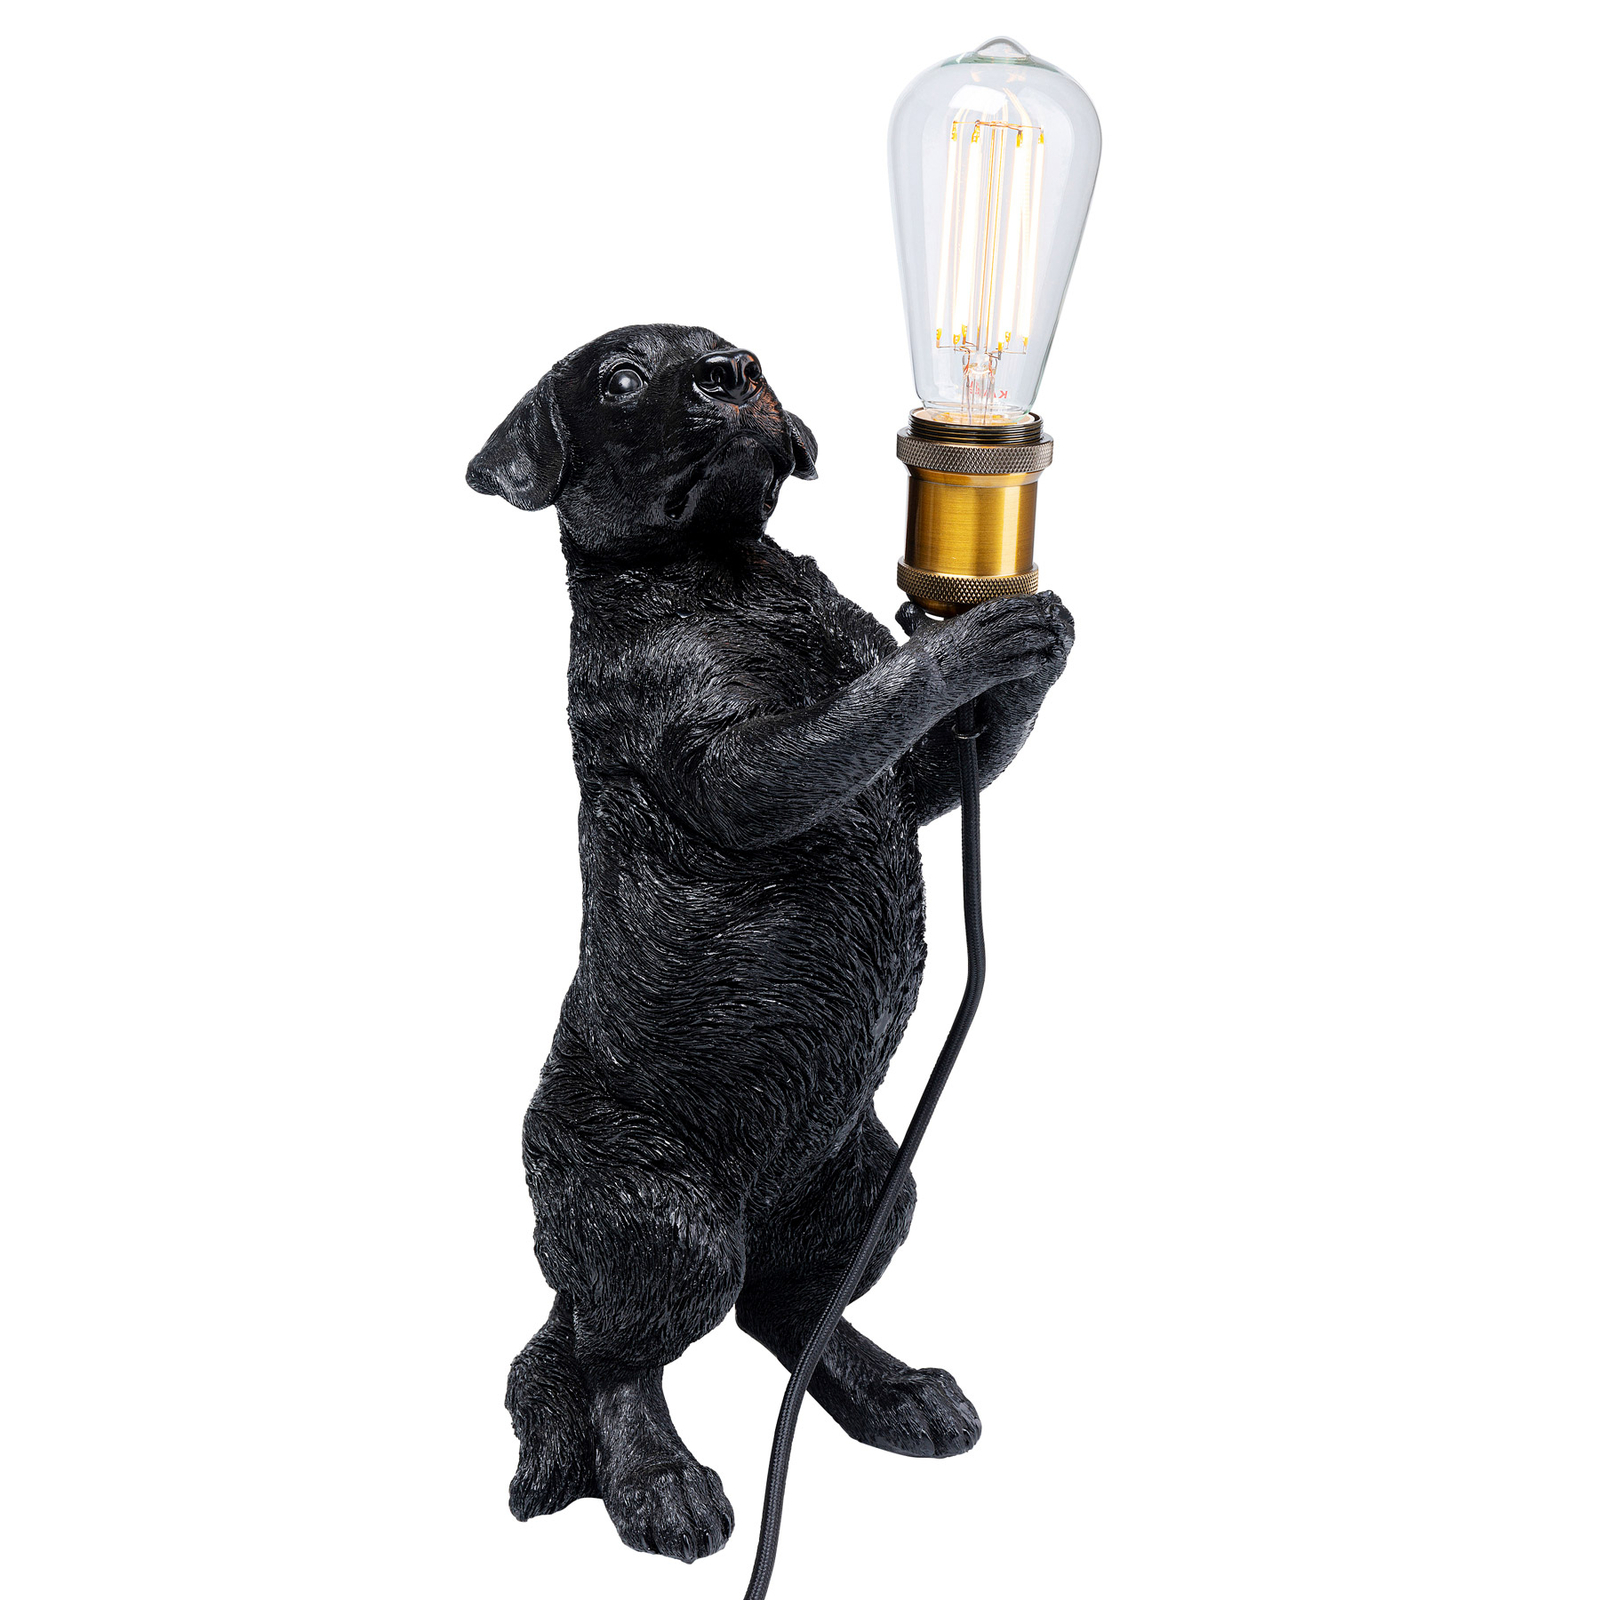 KARE Animal Perro table lamp with dachshund